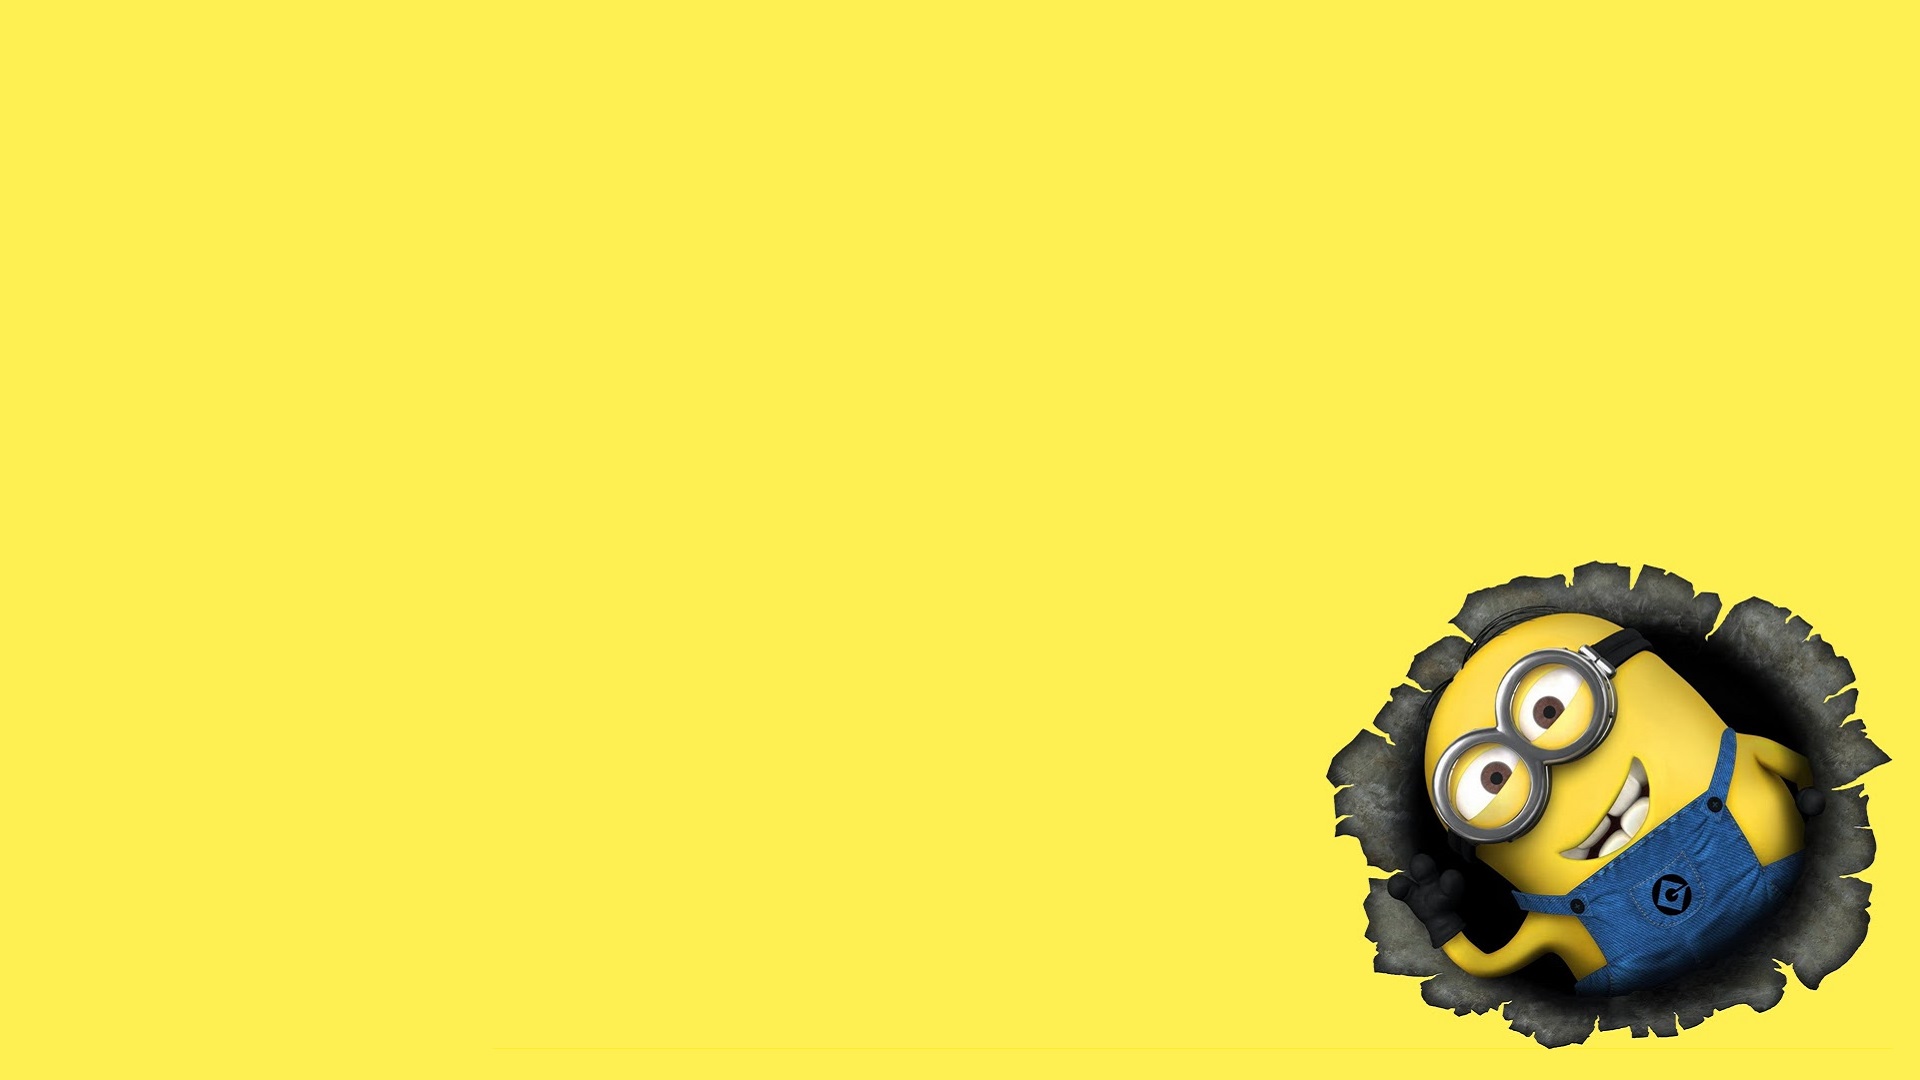 General 1920x1080 minions yellow minimalism simple background yellow background movie characters Universal Pictures